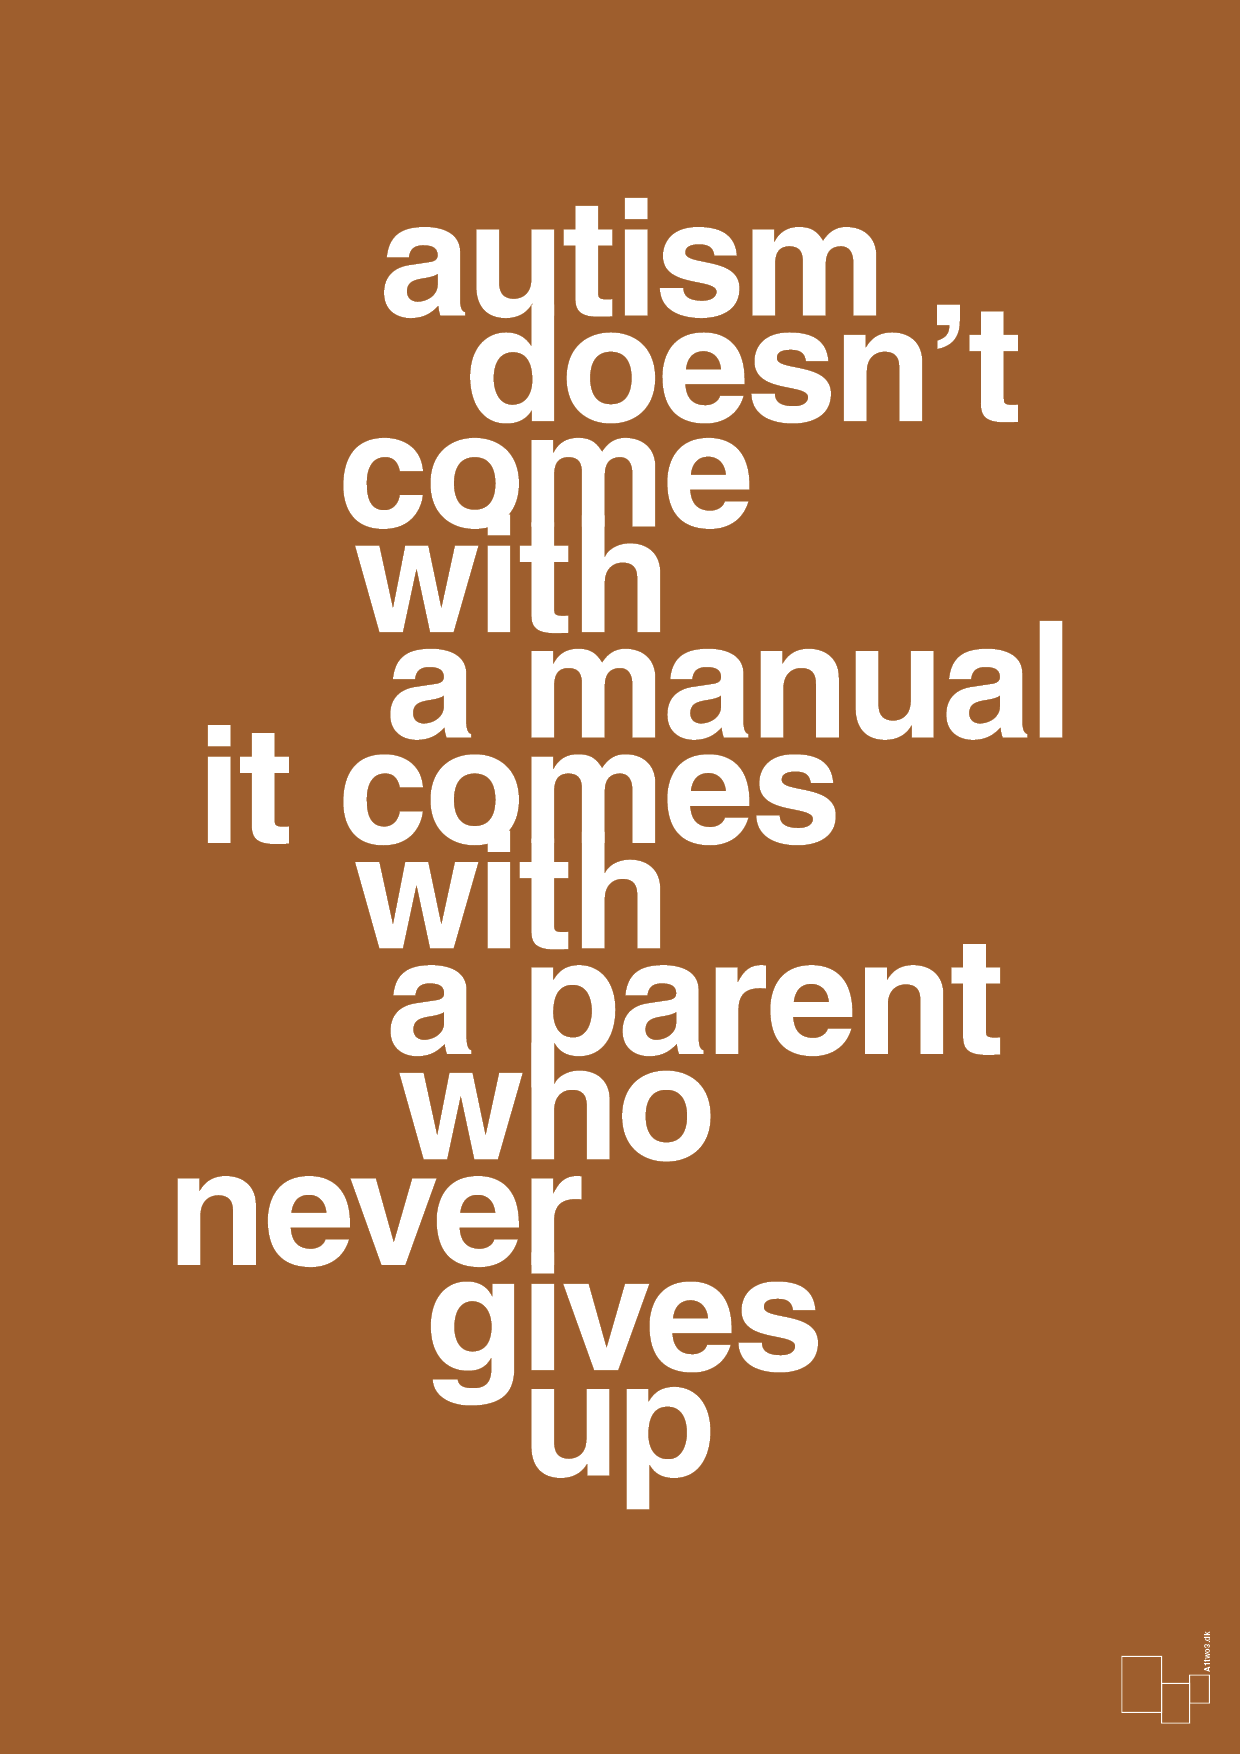 autism doesnt come with a manual it comes with a parent who never gives up - Plakat med Samfund i Cognac